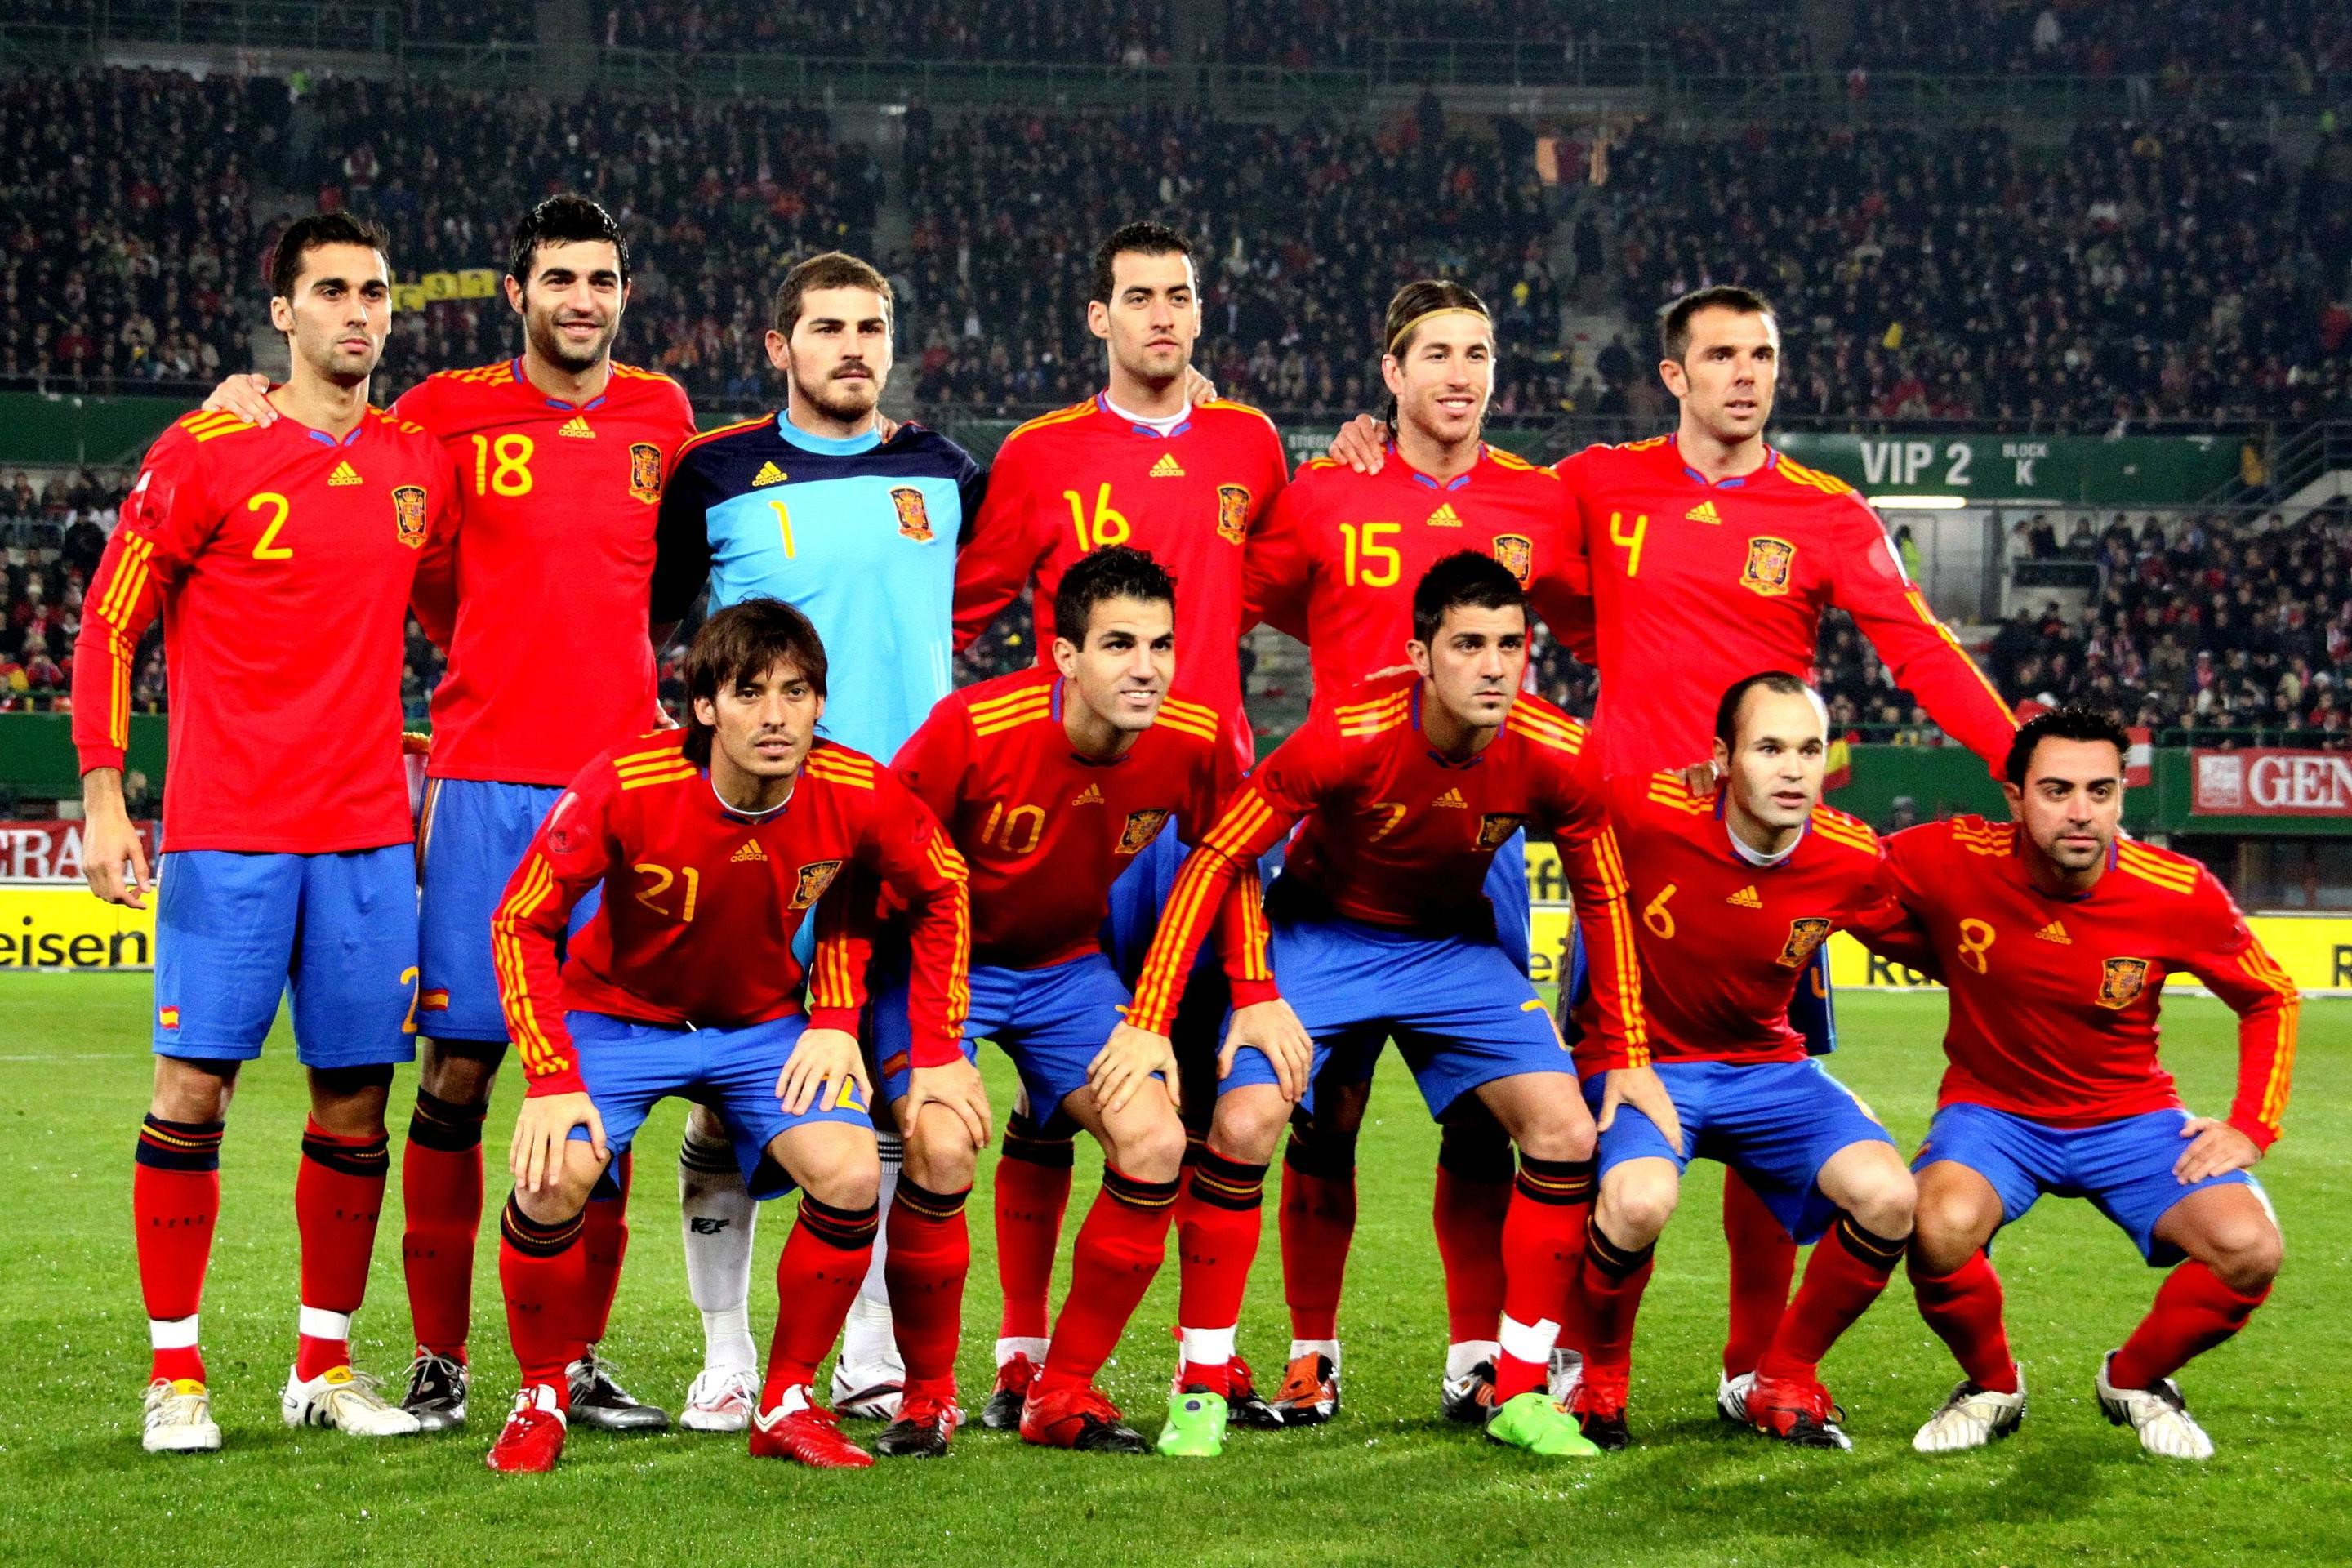 Spain Football Team Hd Images Find Best Latest Spain - Spain Football Team 2018 - HD Wallpaper 